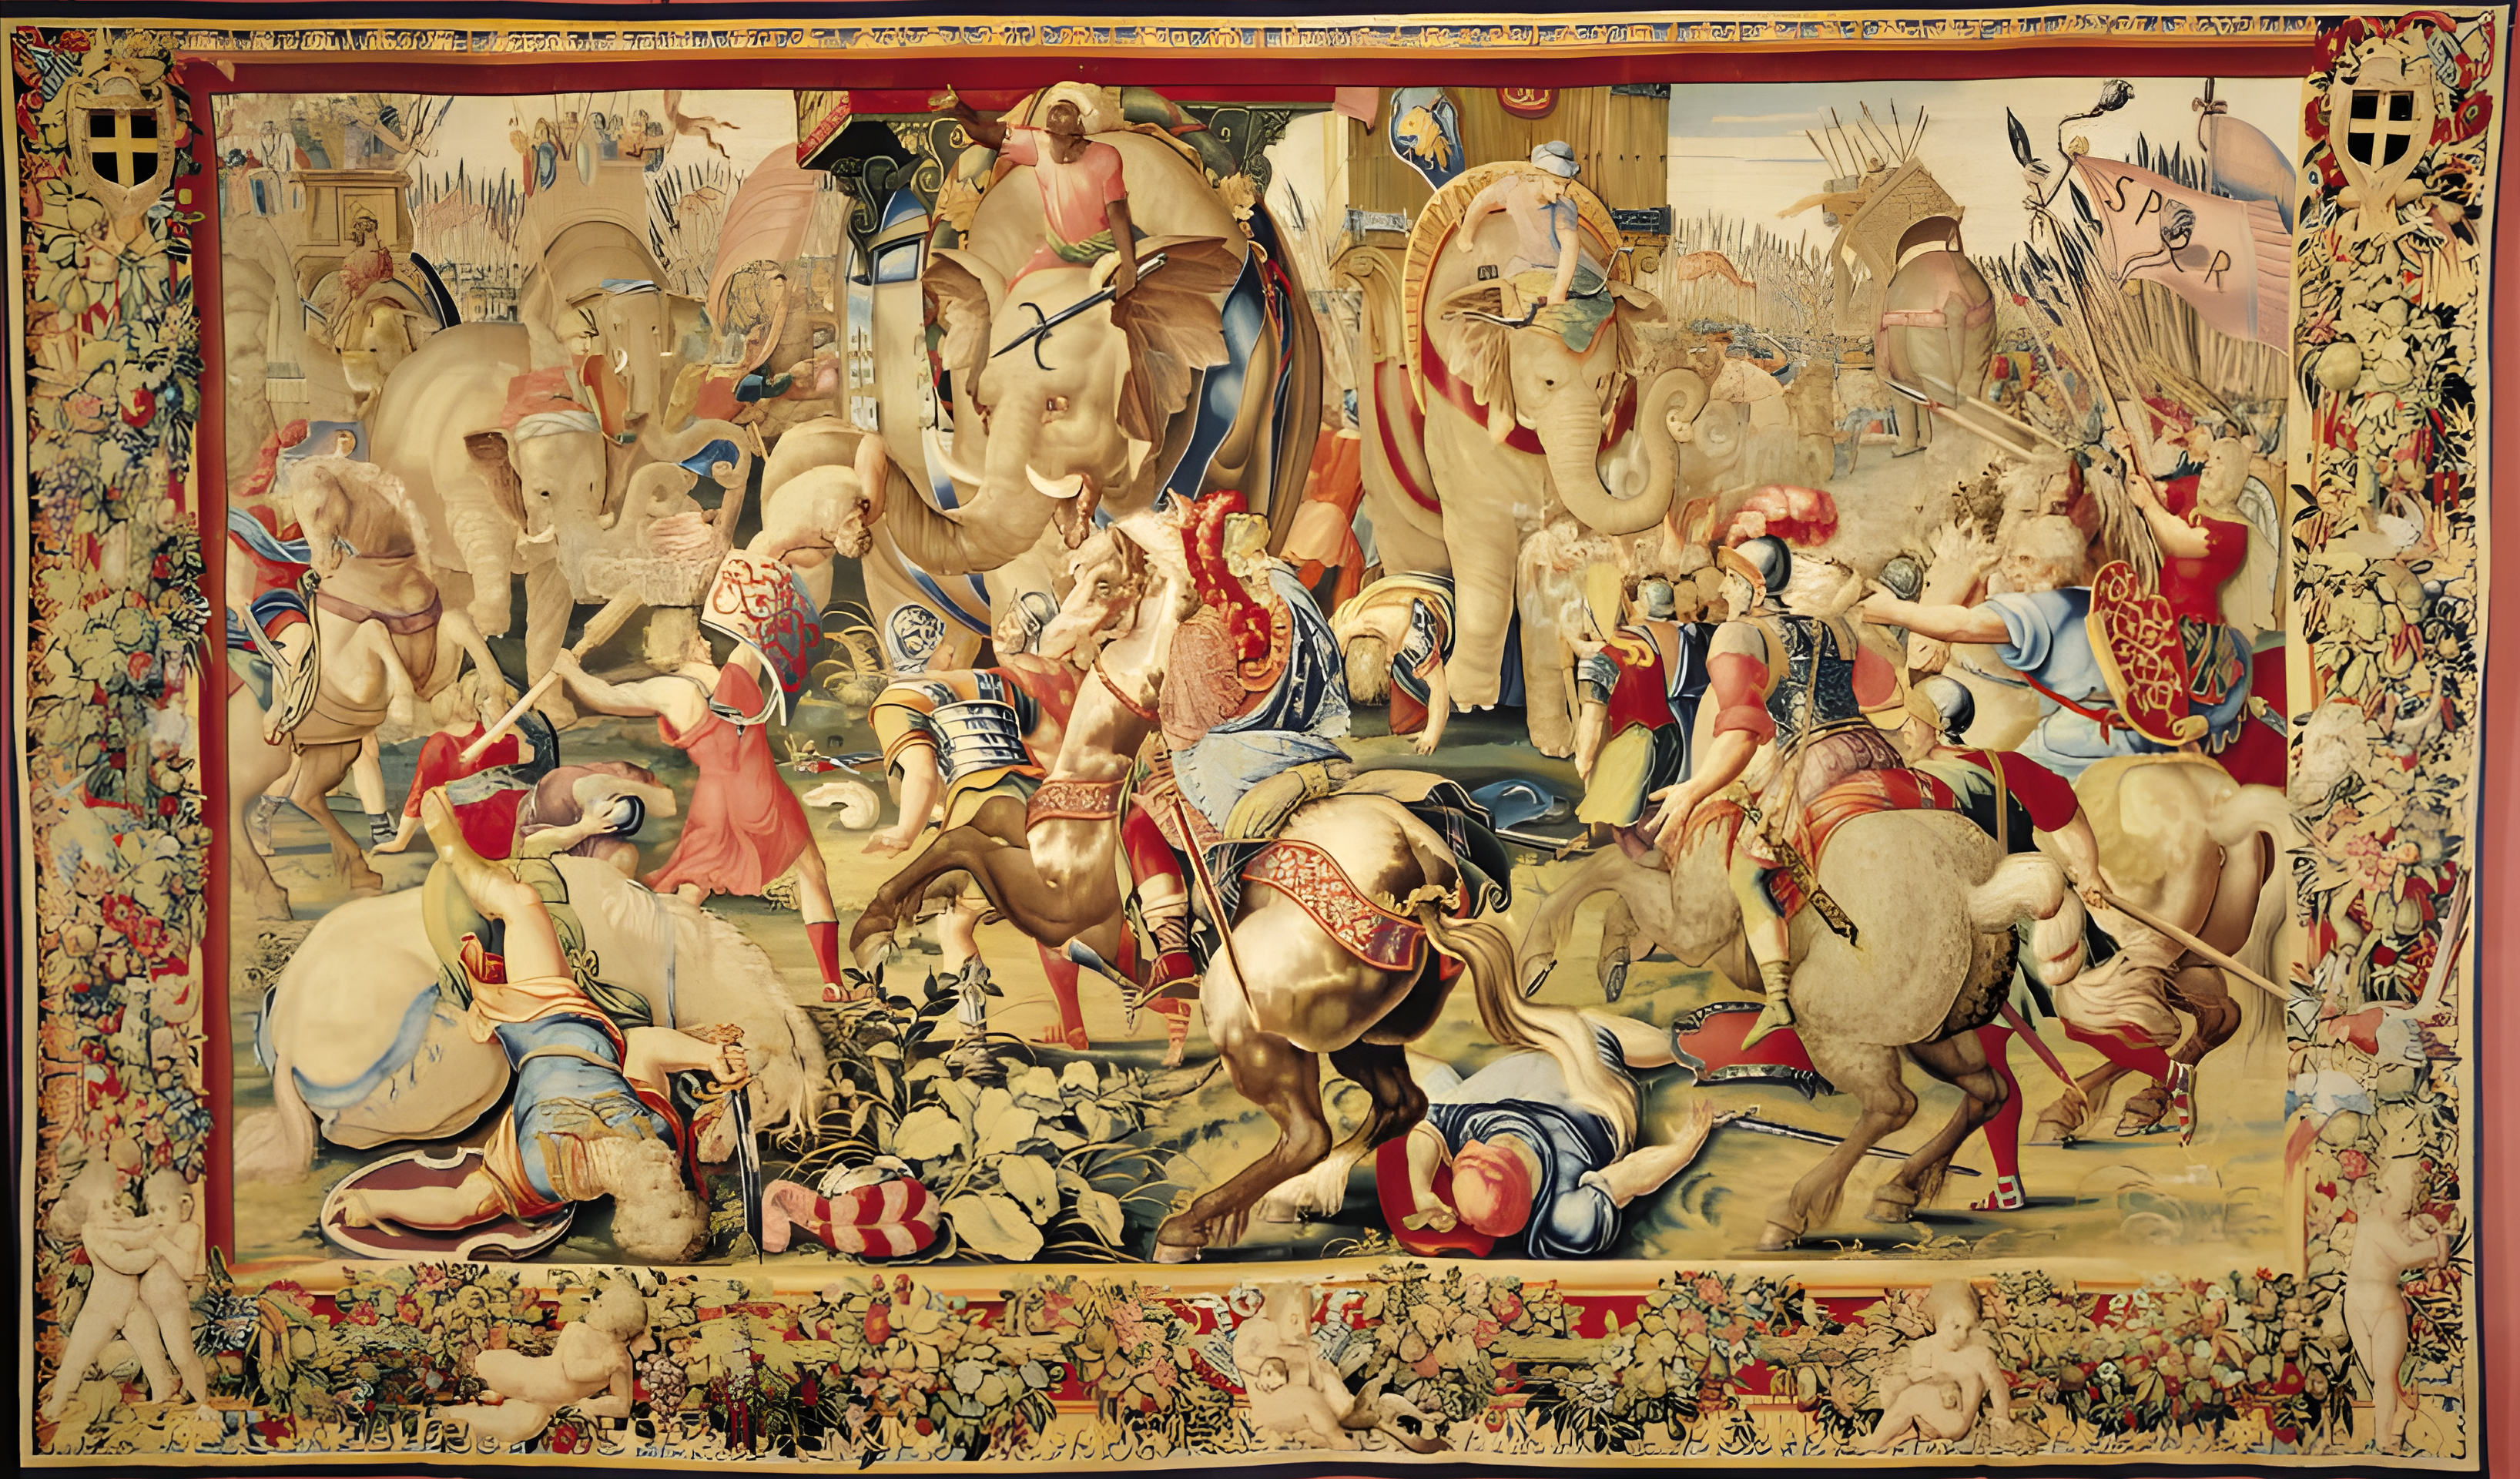 A 16th-century tapestry colorfully illustrates the Battle of Zama.